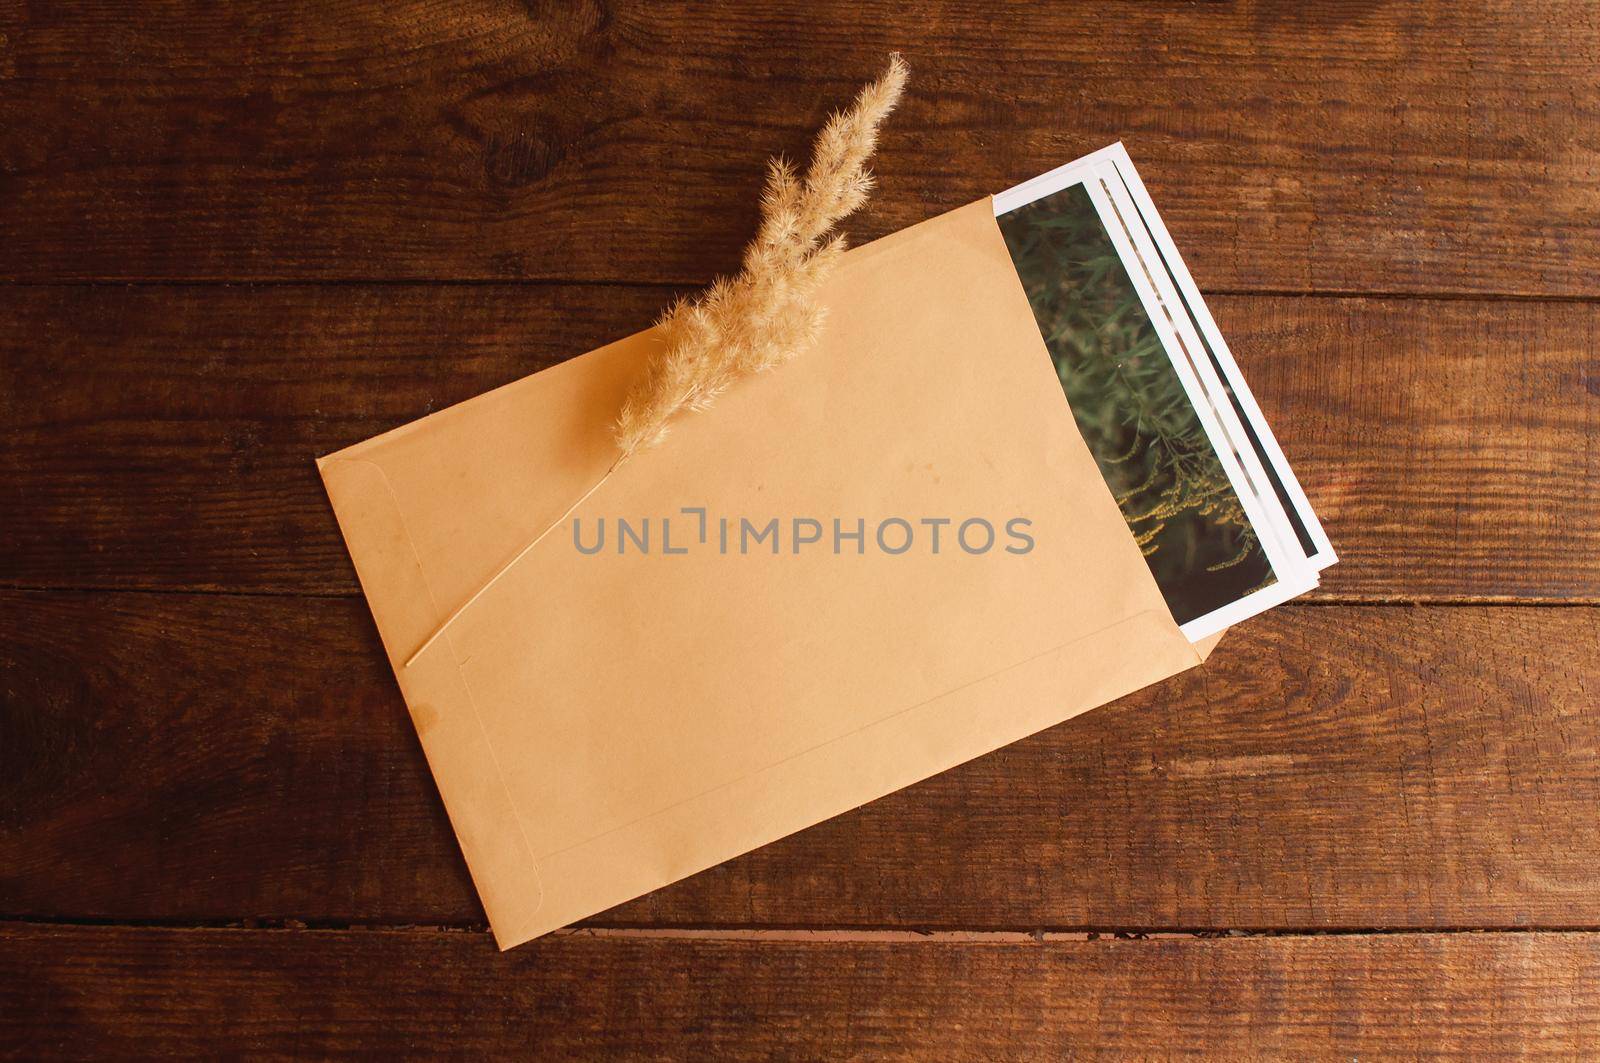 photos are enclosed in a beige envelope, located on a brown wooden table